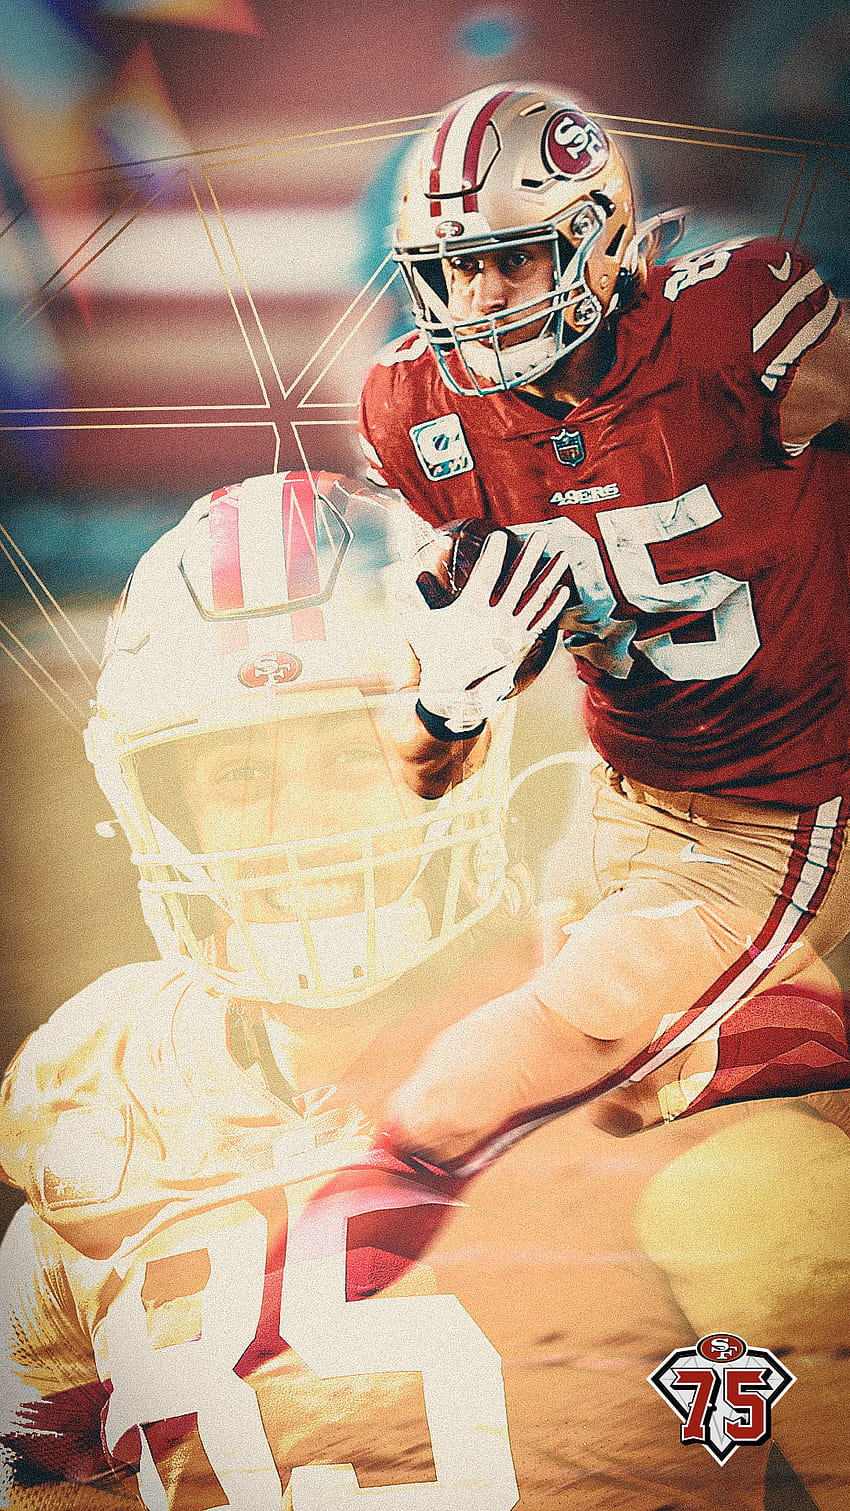 Phone Wallpaper I made leading into the 2013 Playoffs. (1080p x 1920p) :  r/49ers